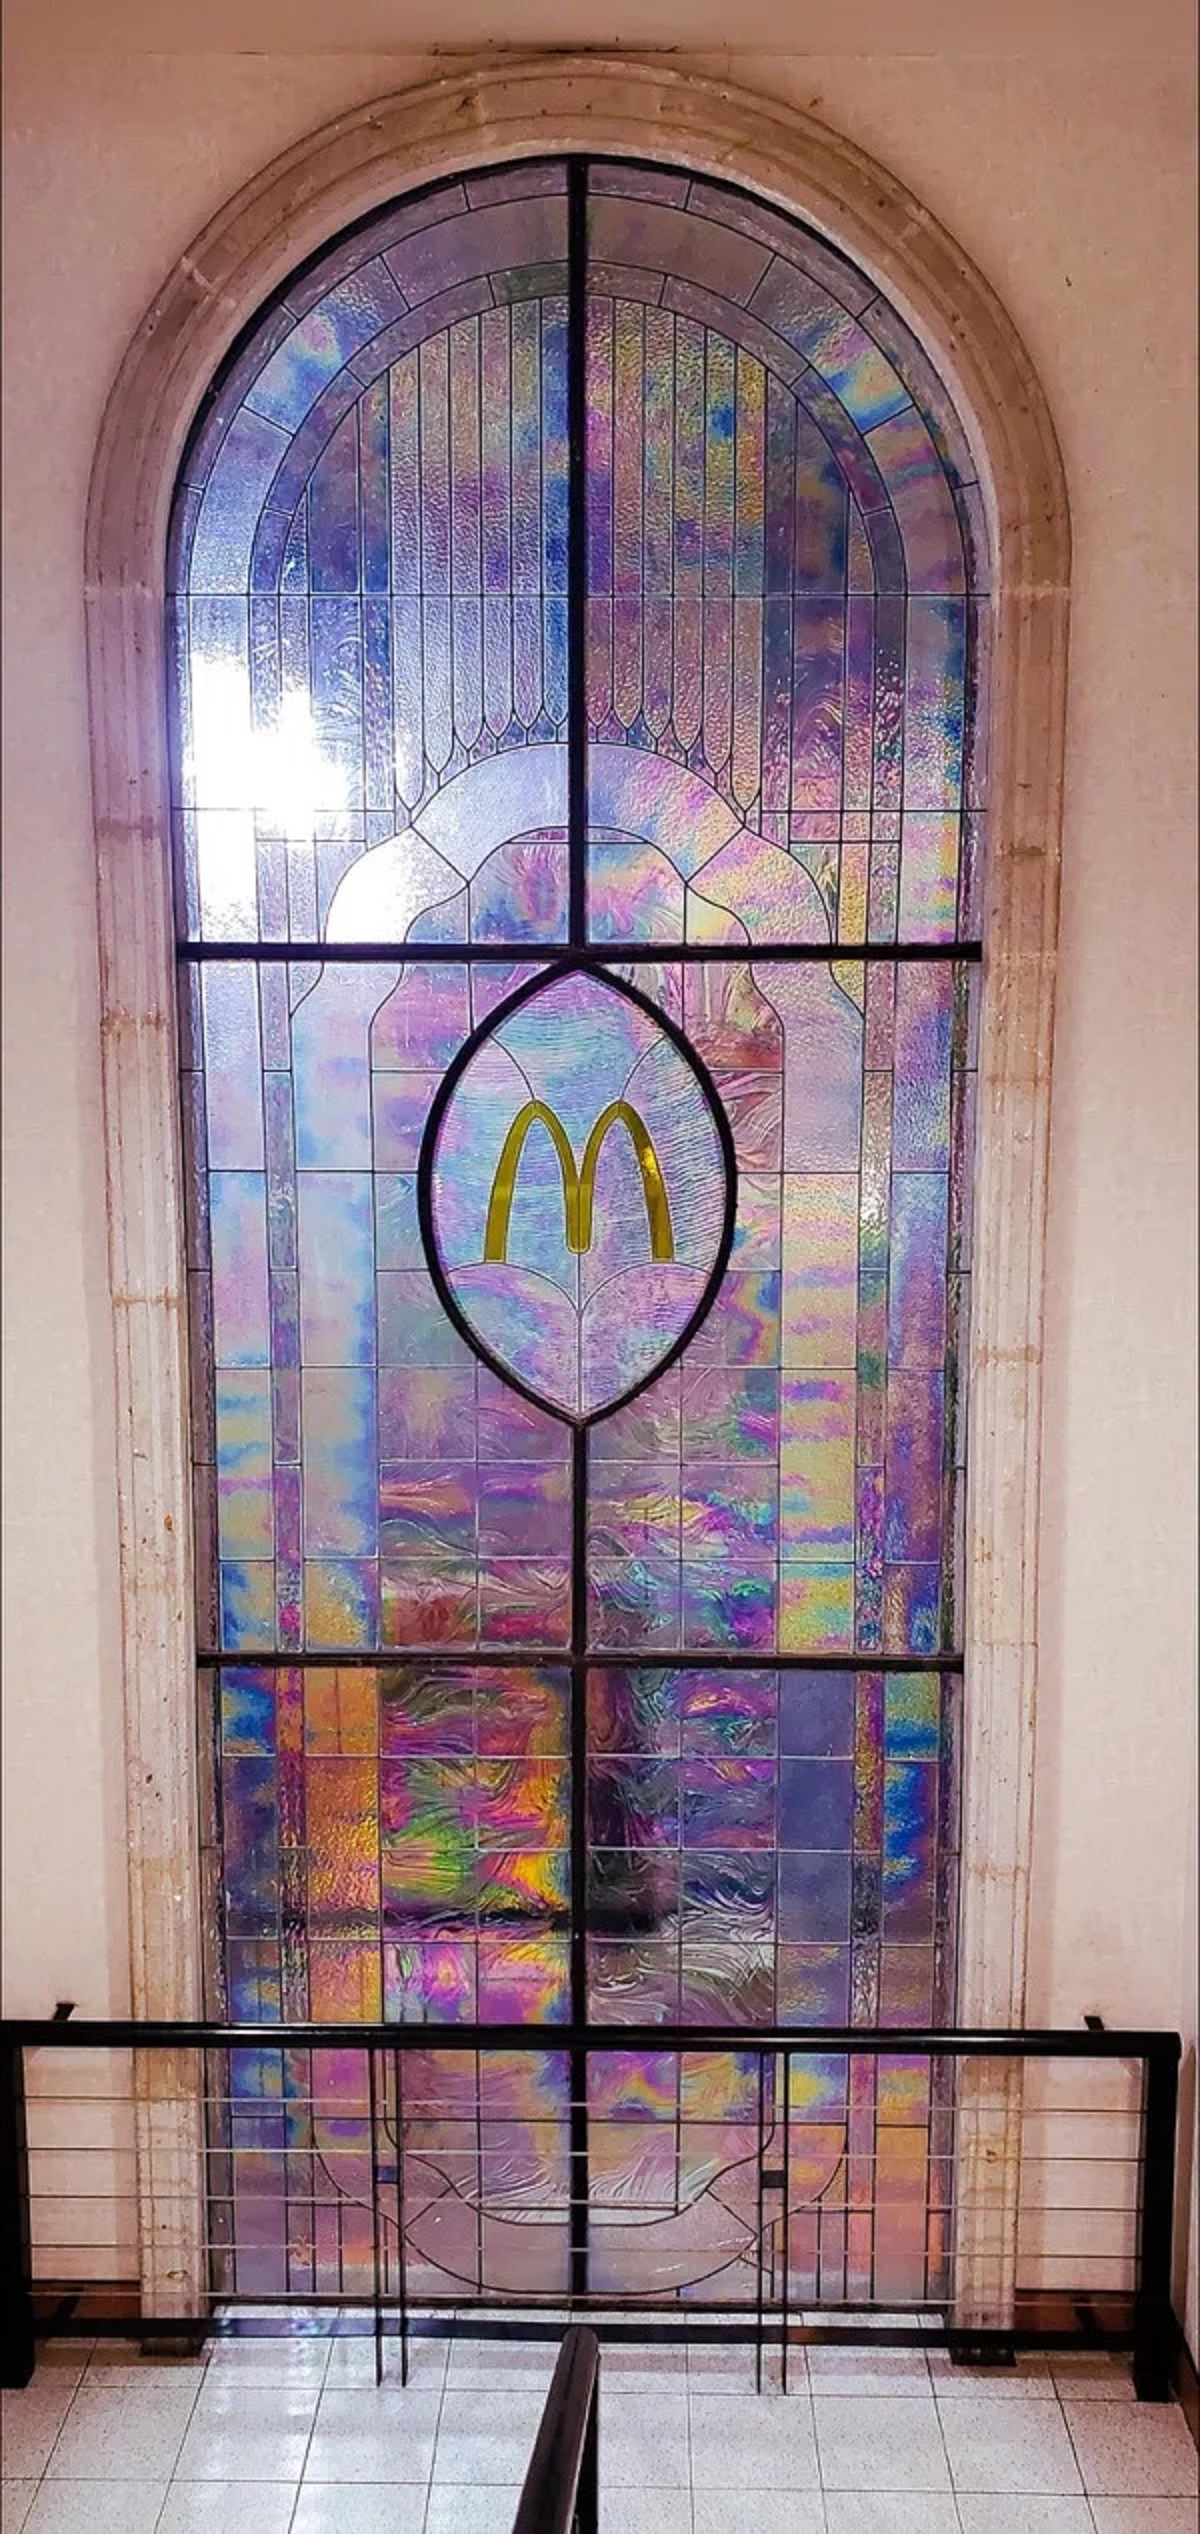 The McDonald’s near my house has a really cool stained glass McDonald’s logo.